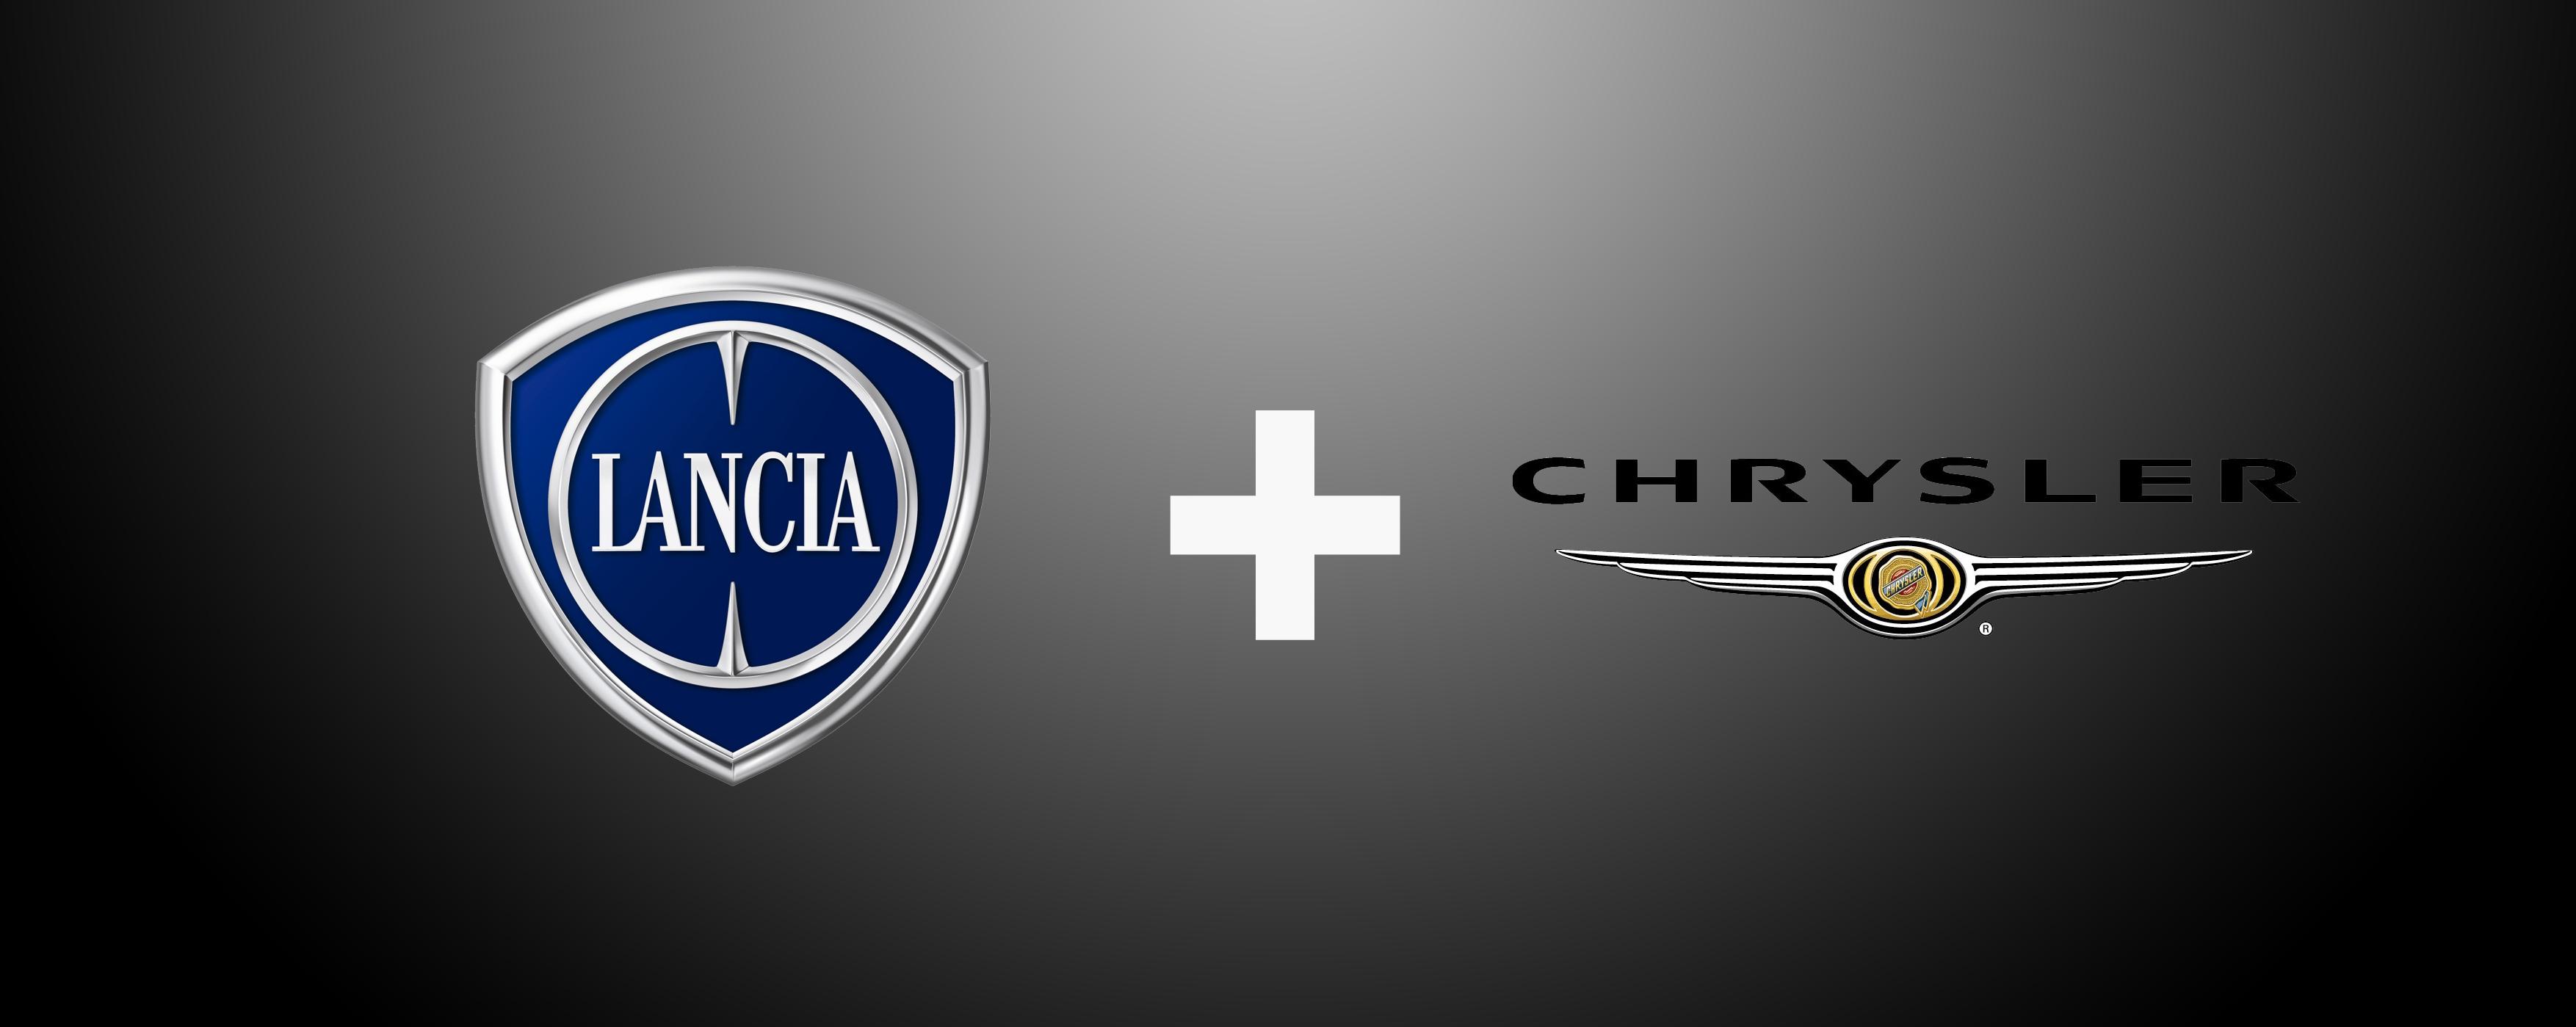 Lancia And Chrysler A Marriage For Long Fiat Group World